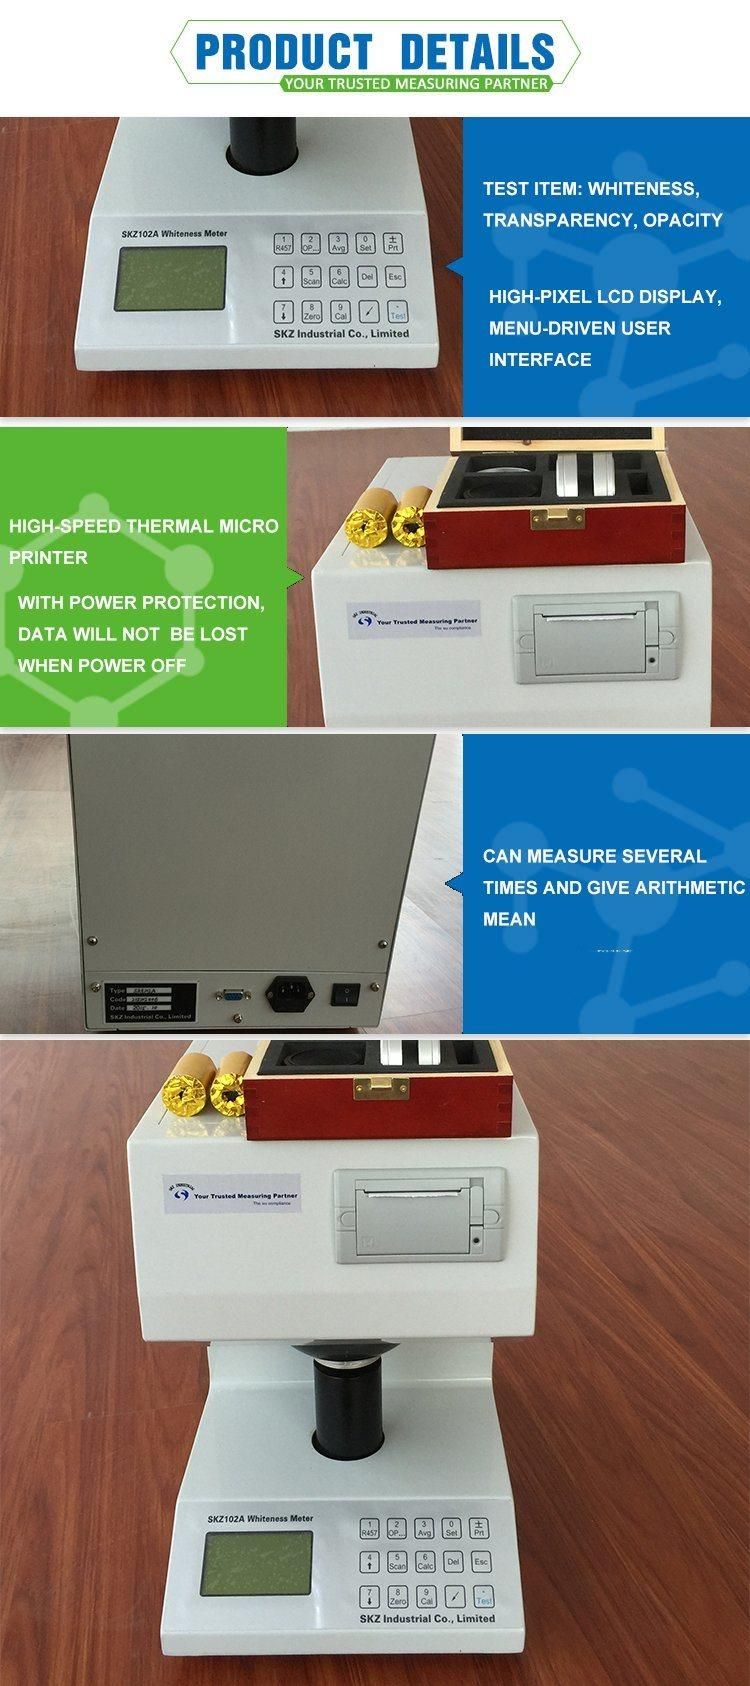 High Accuracy Light Scattering Coefficient Tester for Ceramic